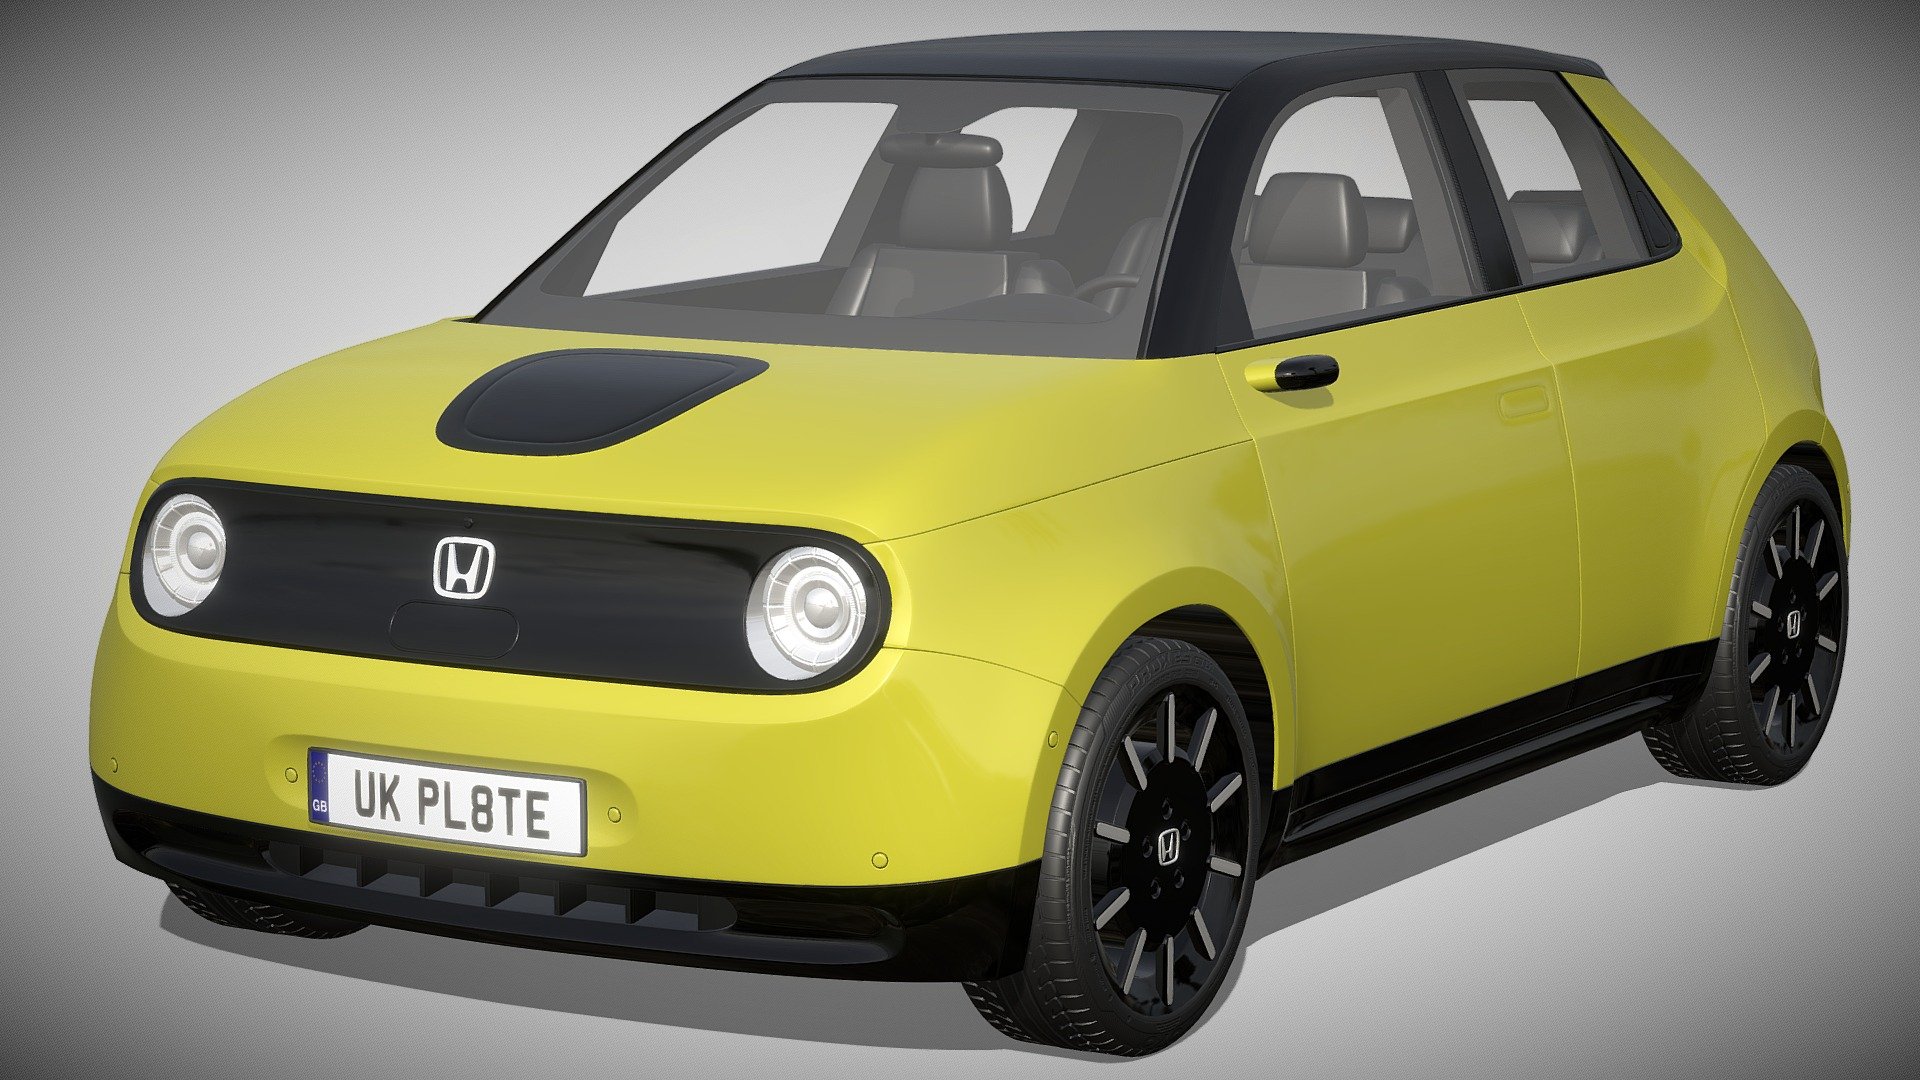 Honda E-Prototype

https://www.honda.co.uk/engineroom/electric/ev/driving-the-honda-e-prototype/

Clean geometry Light weight model, yet completely detailed for HI-Res renders. Use for movies, Advertisements or games

Corona render and materials

All textures include in *.rar files

Lighting setup is not included in the file! - Honda E-Prototype - Buy Royalty Free 3D model by zifir3d 3d model